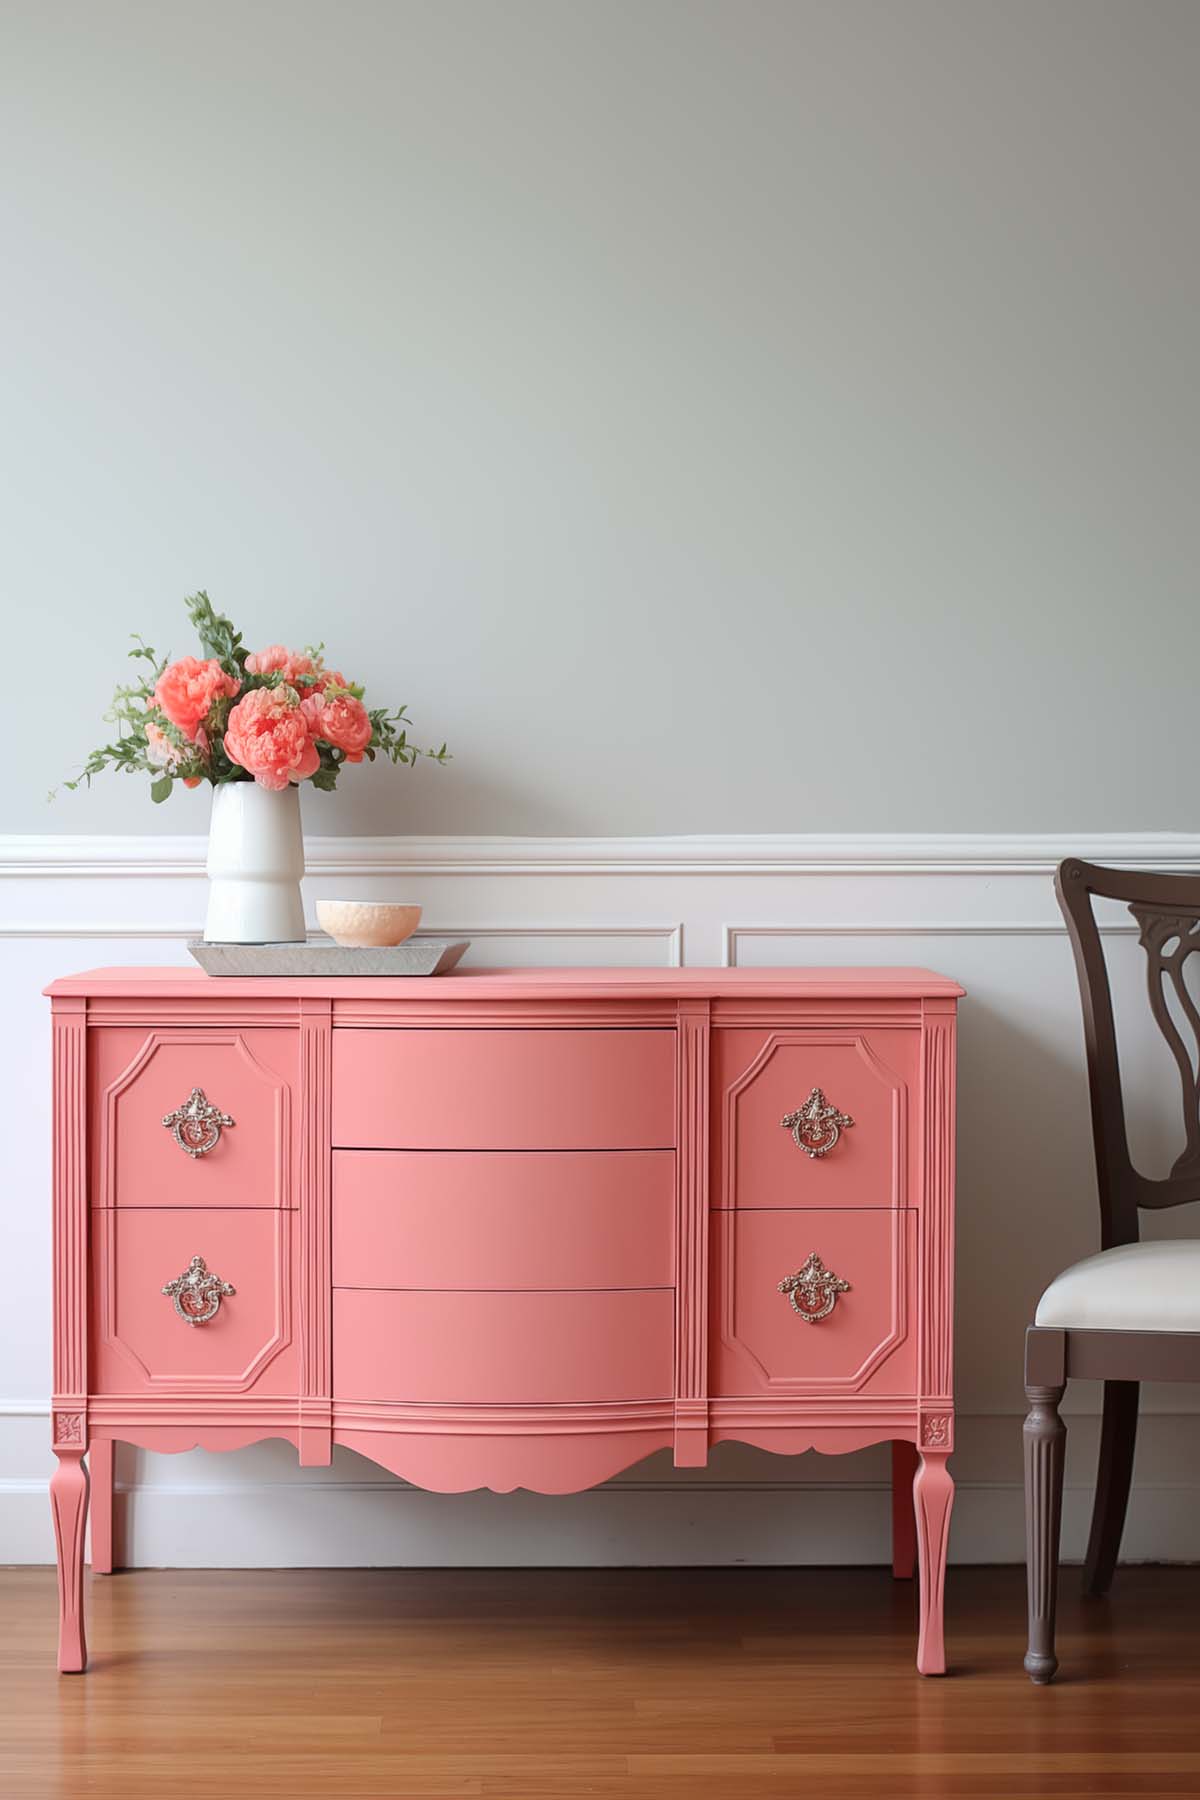 an entryway table or dining room console painted a vibrant coral tone which is sherwin williams coral rose paint color.